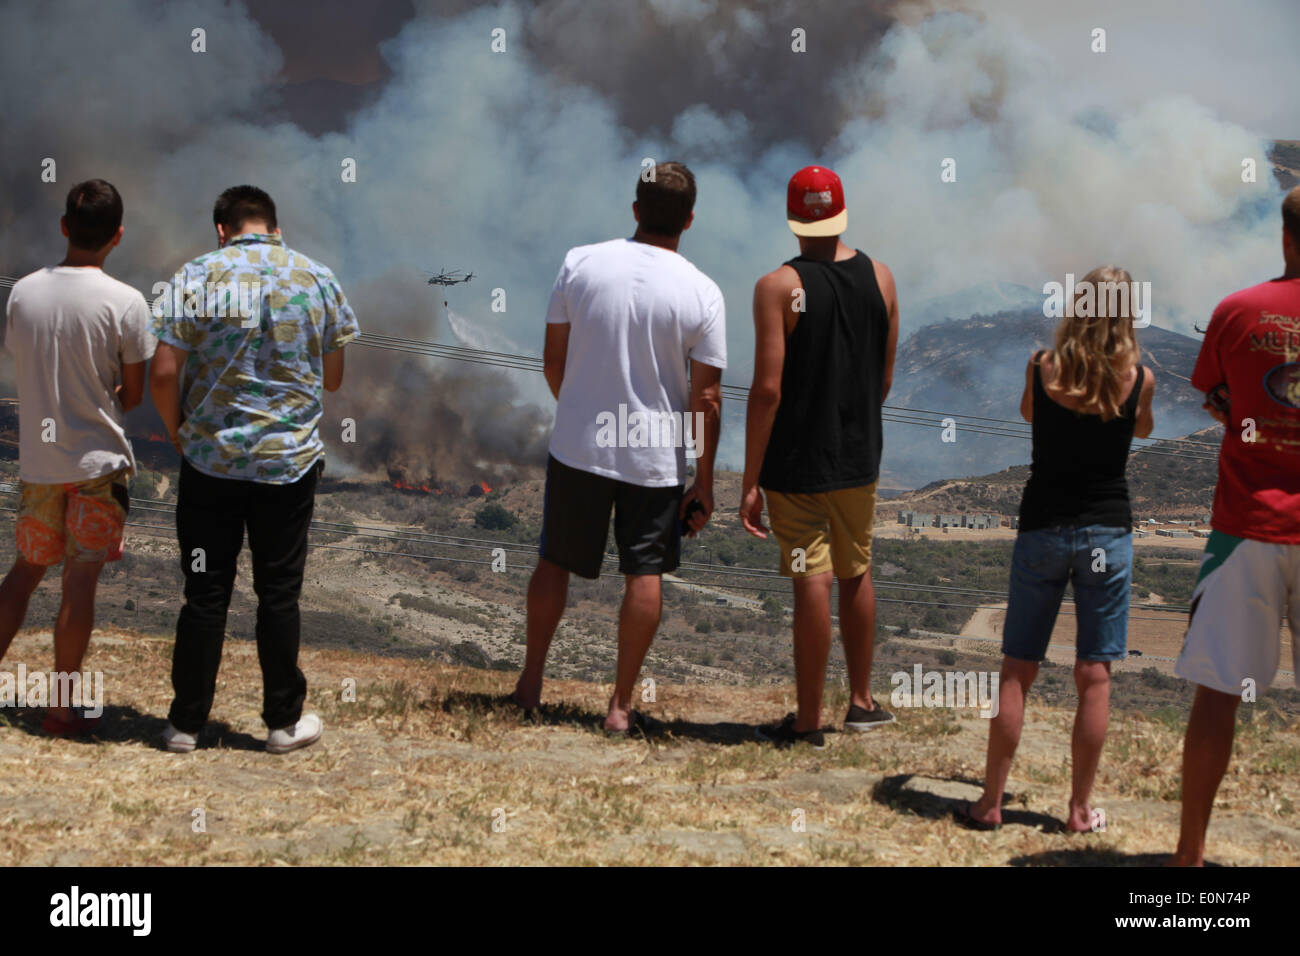 San Clemente, California, USA. 16th May, 2014. San Clemente residents watch fire fighting helicopters douse water on the Las Pulgas wildfire inside Camp Pendleton marine Base. The wildfire in the western region of Camp Pendleton has grown to 8,000 acres burned, base officials confirmed, known as the Las Pulgas Fire, is 5 percent contained, officials said. California firefighters have continued to battle wildfires, which have scorched more than 11,000 acres and caused thousands to evacuate. Credit:  ZUMA Press, Inc./Alamy Live News Stock Photo